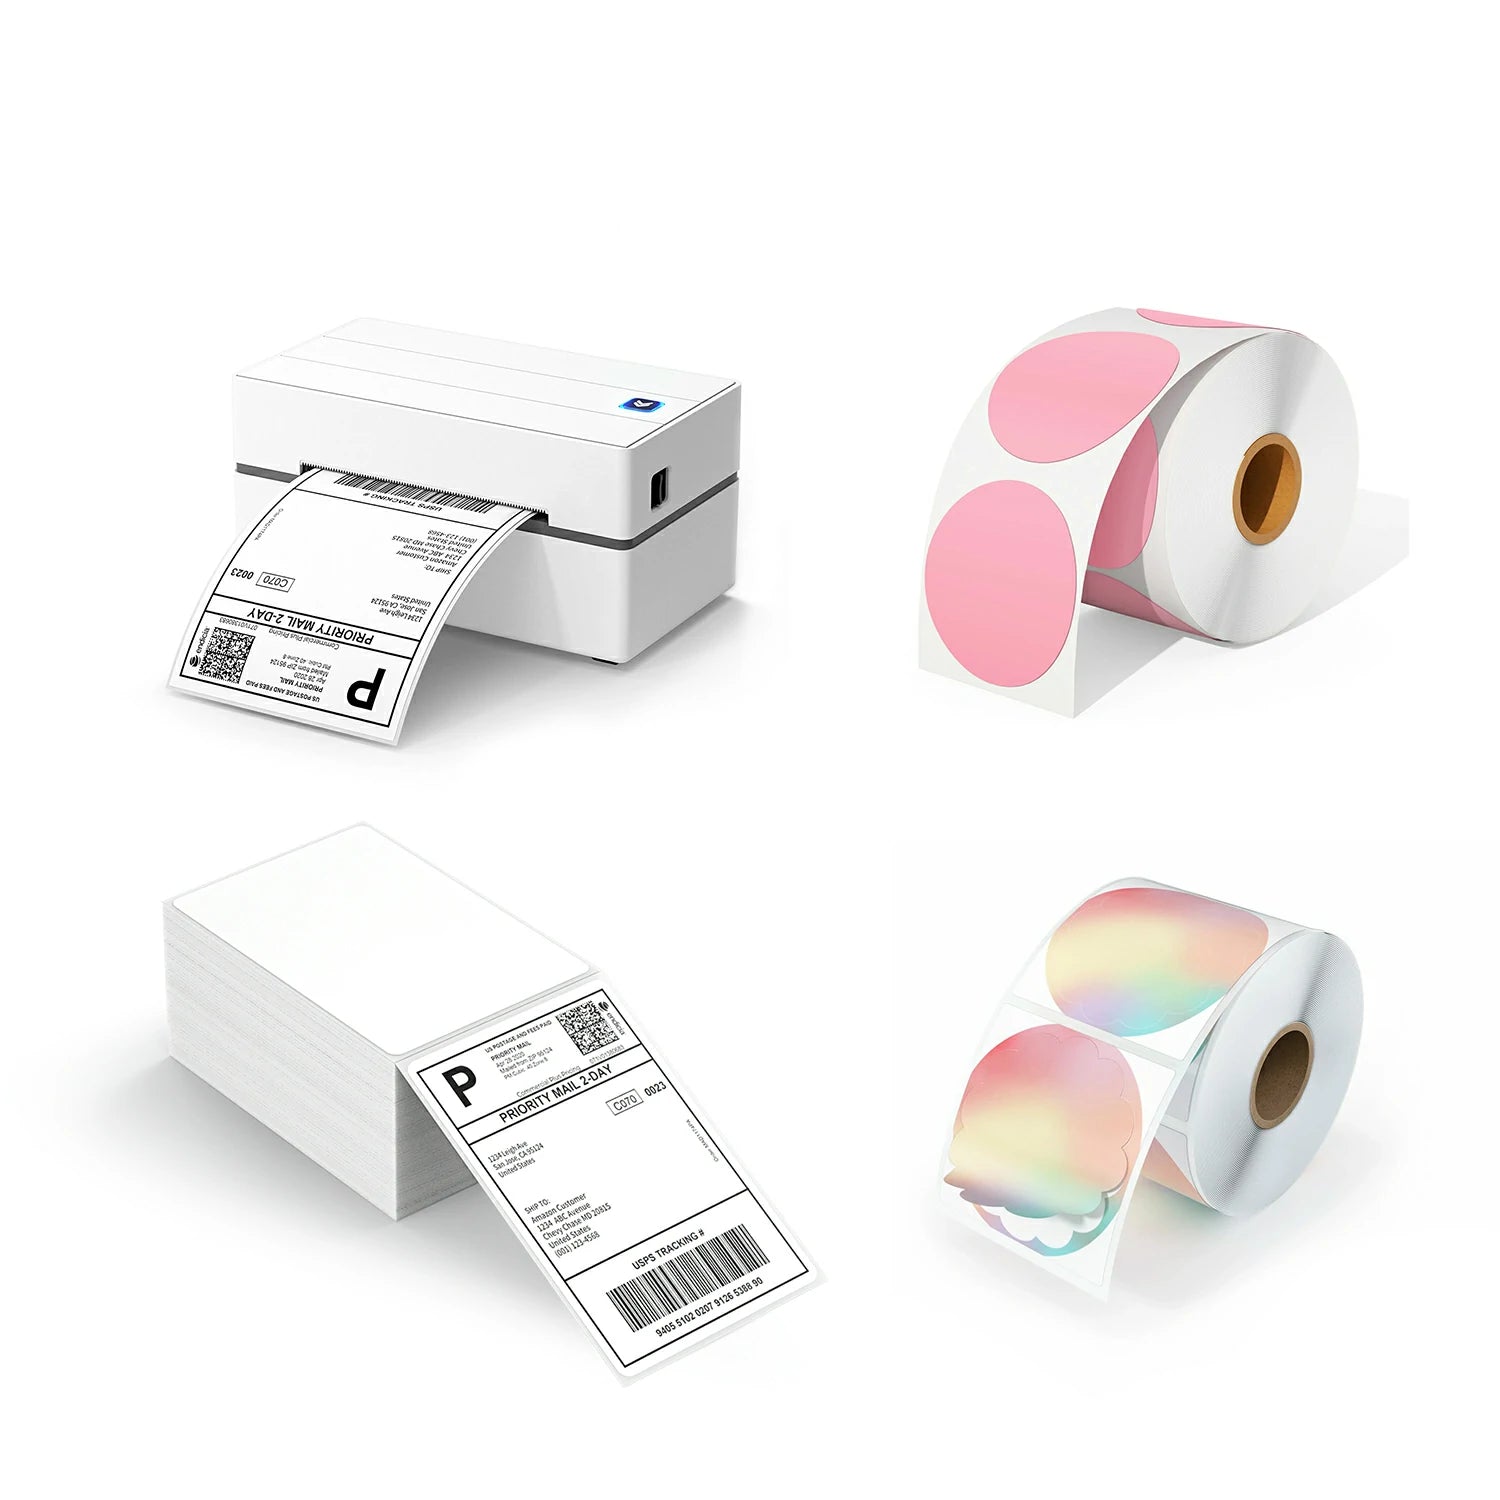 The MUNBYN 130 thermal printer kit includes a USB thermal label printer, a stack of shipping labels, a roll of pink circle labels, and a roll of scallop round labels.